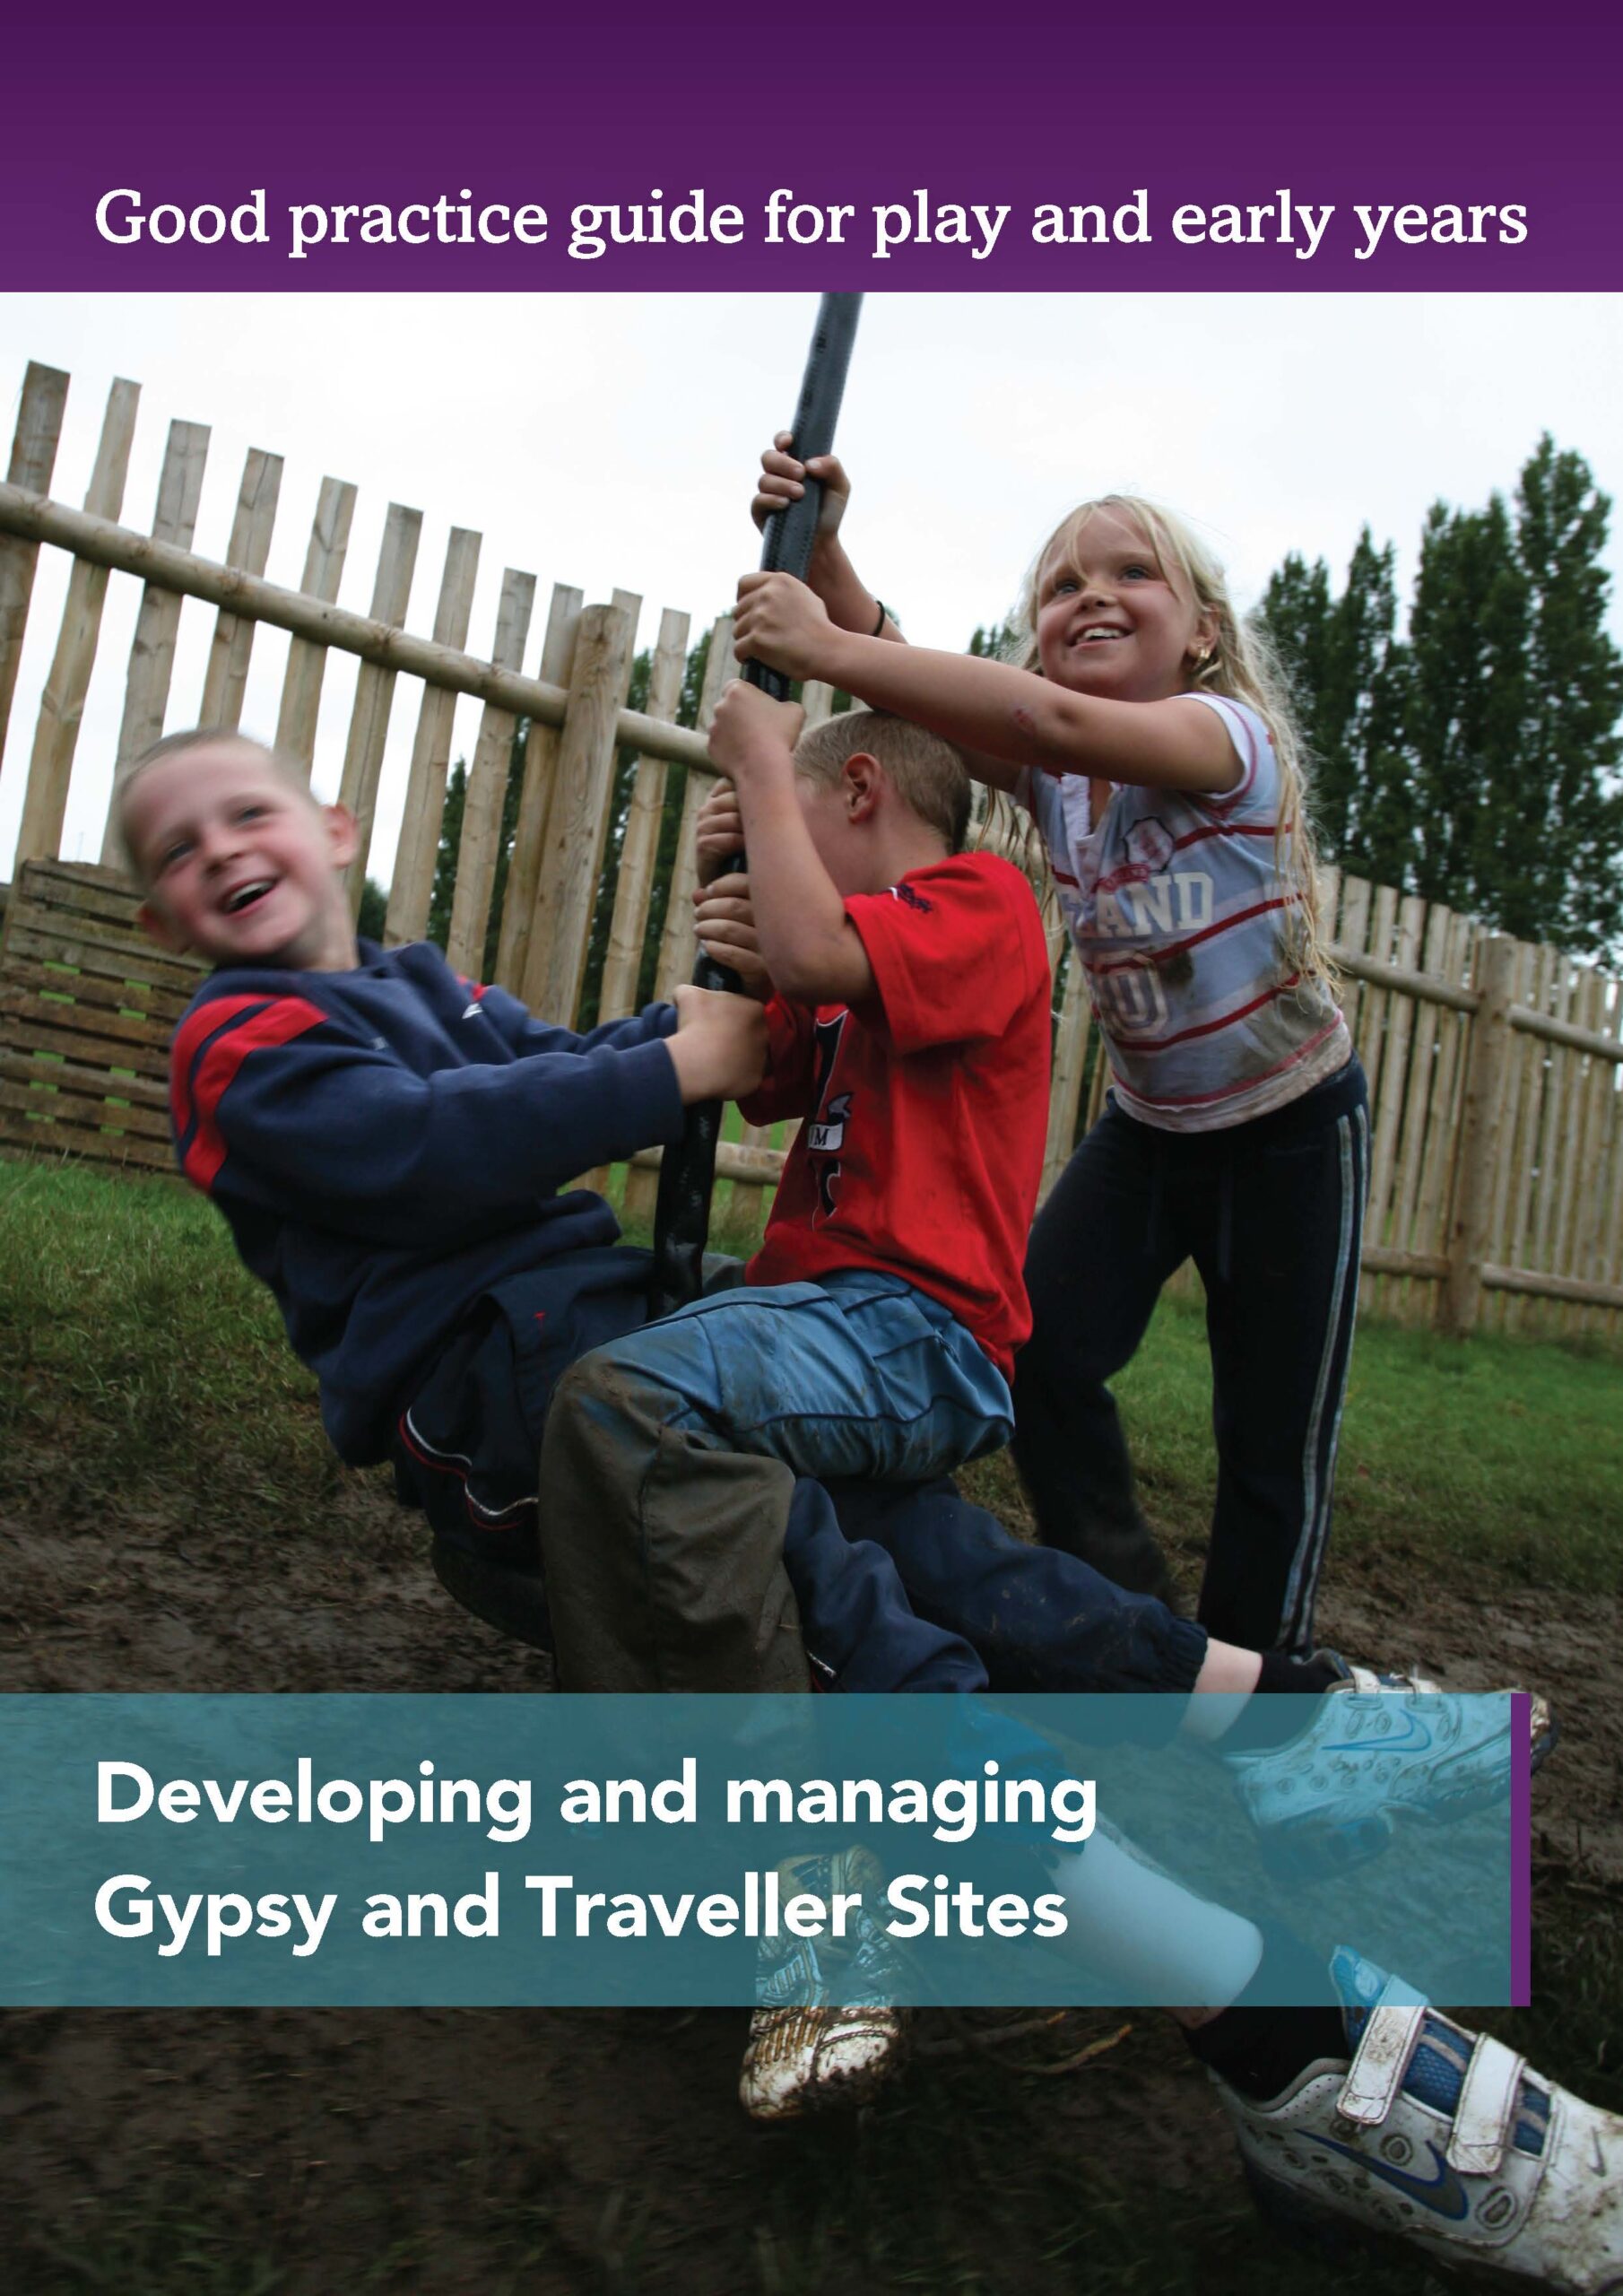 Developing and managing Gypsy and Traveller sites